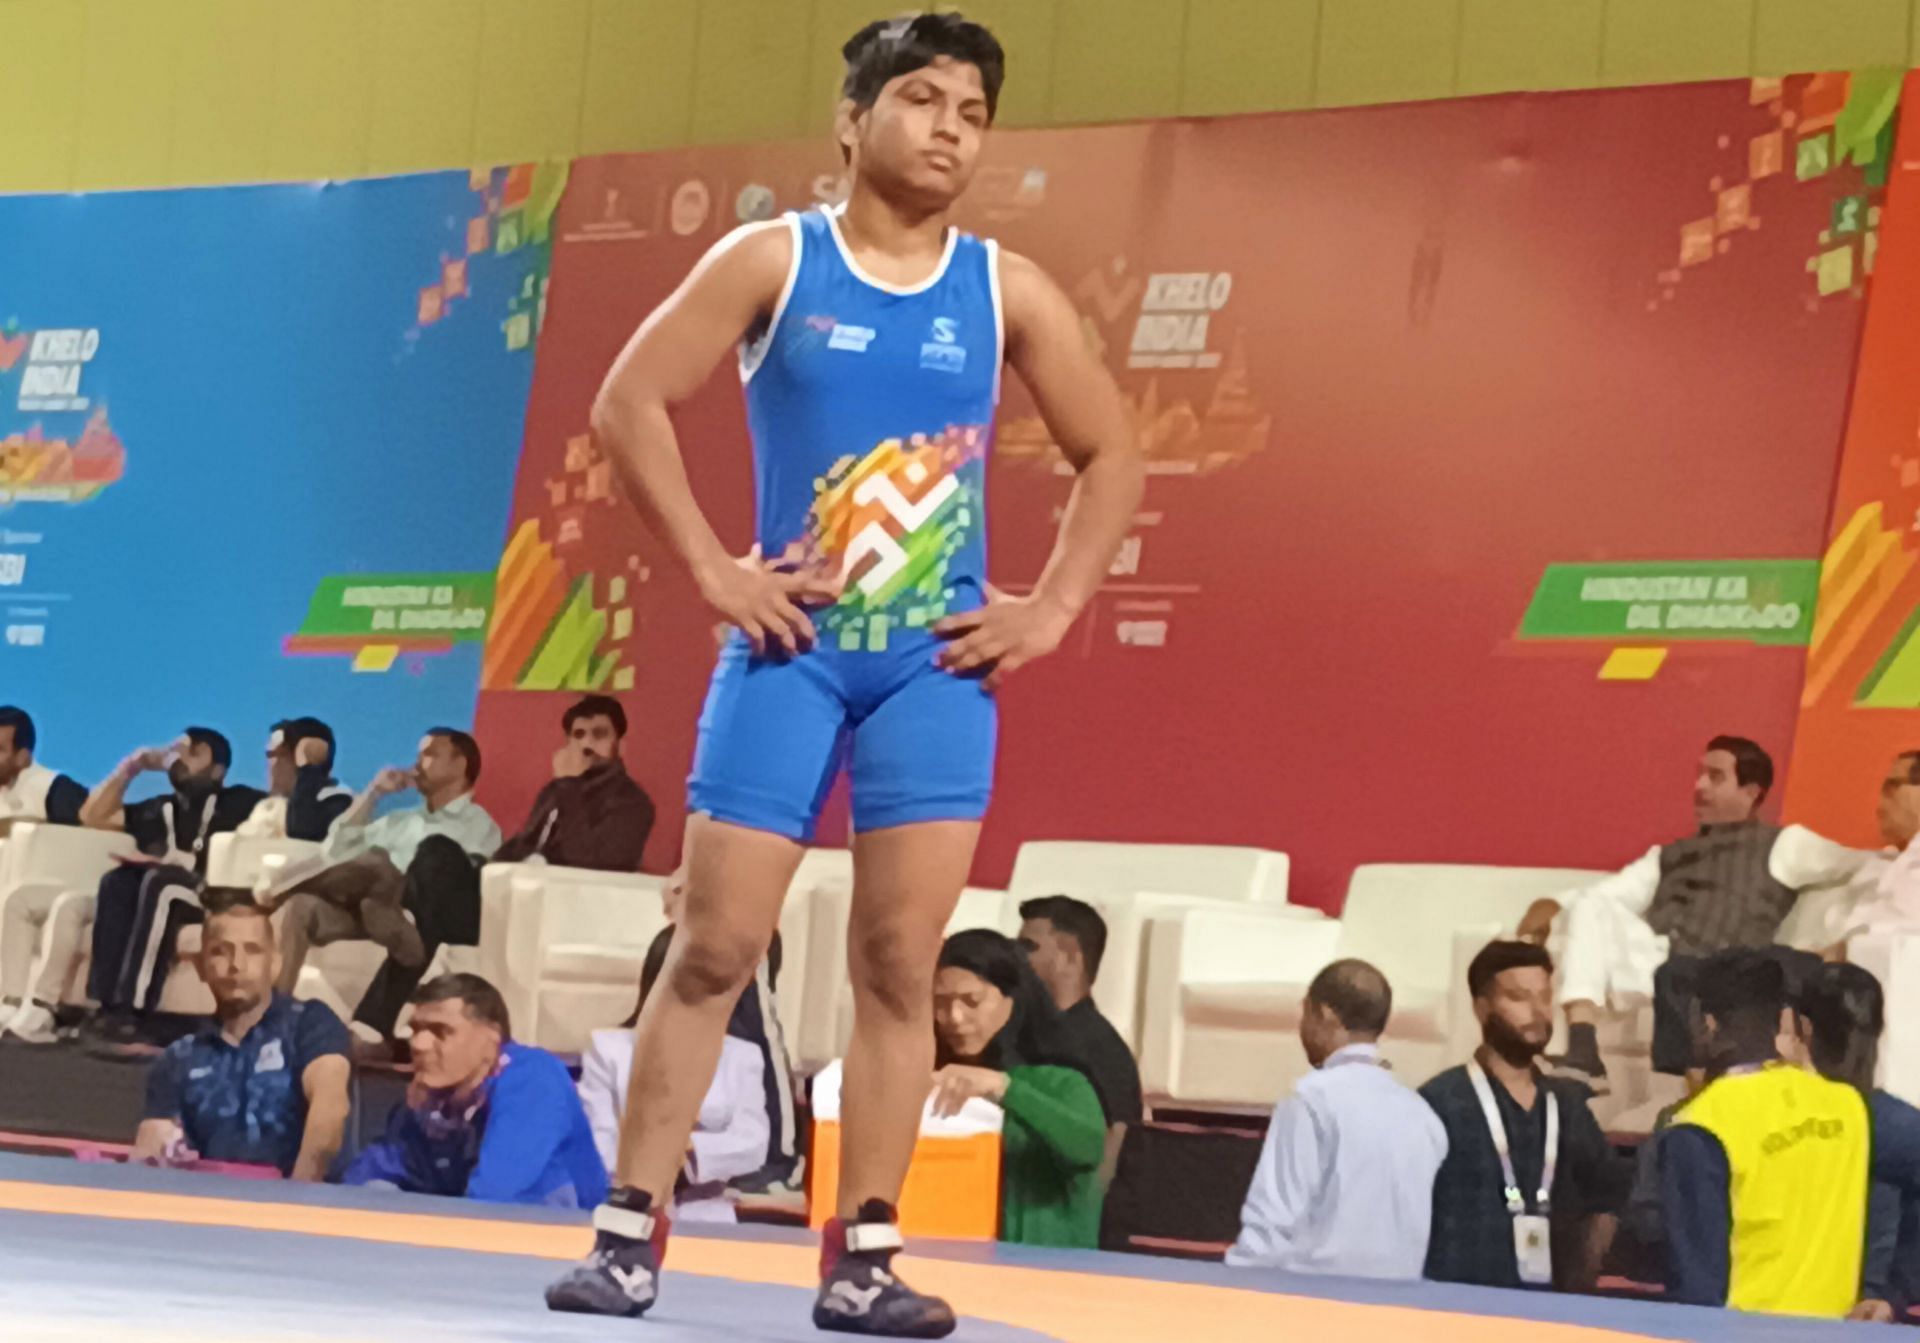 Samrudhi from Sangli settled for silver in women&rsquo;s 46kg freestyle wrestling at the just concluded Khelo India Youth Games in Bhopal. Photo credit Somit Biswas.